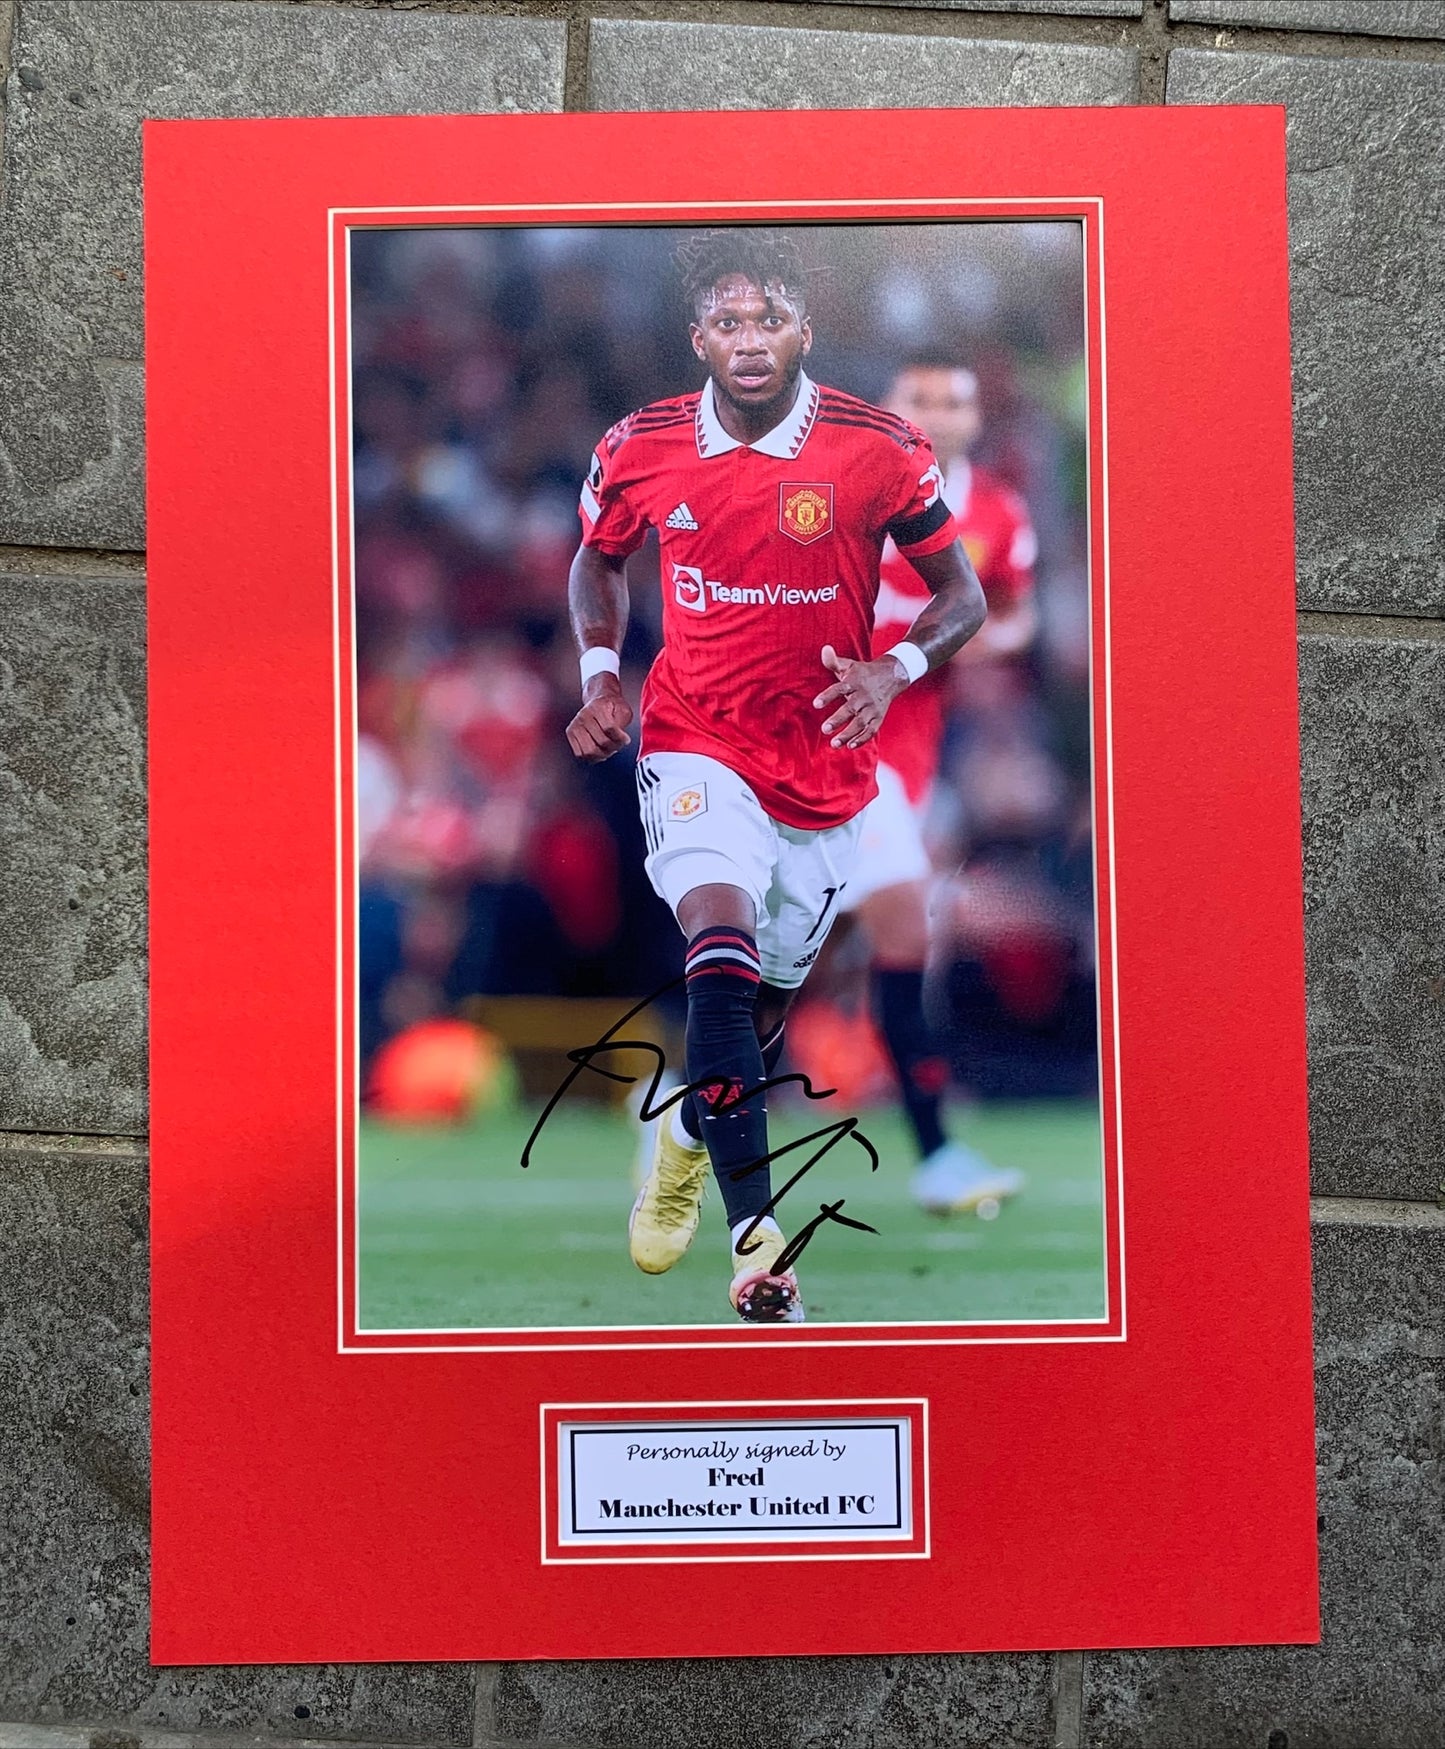 Fred - Manchester United FC - 16x12in signed photo mount - MUFC memorabilia, gift, display